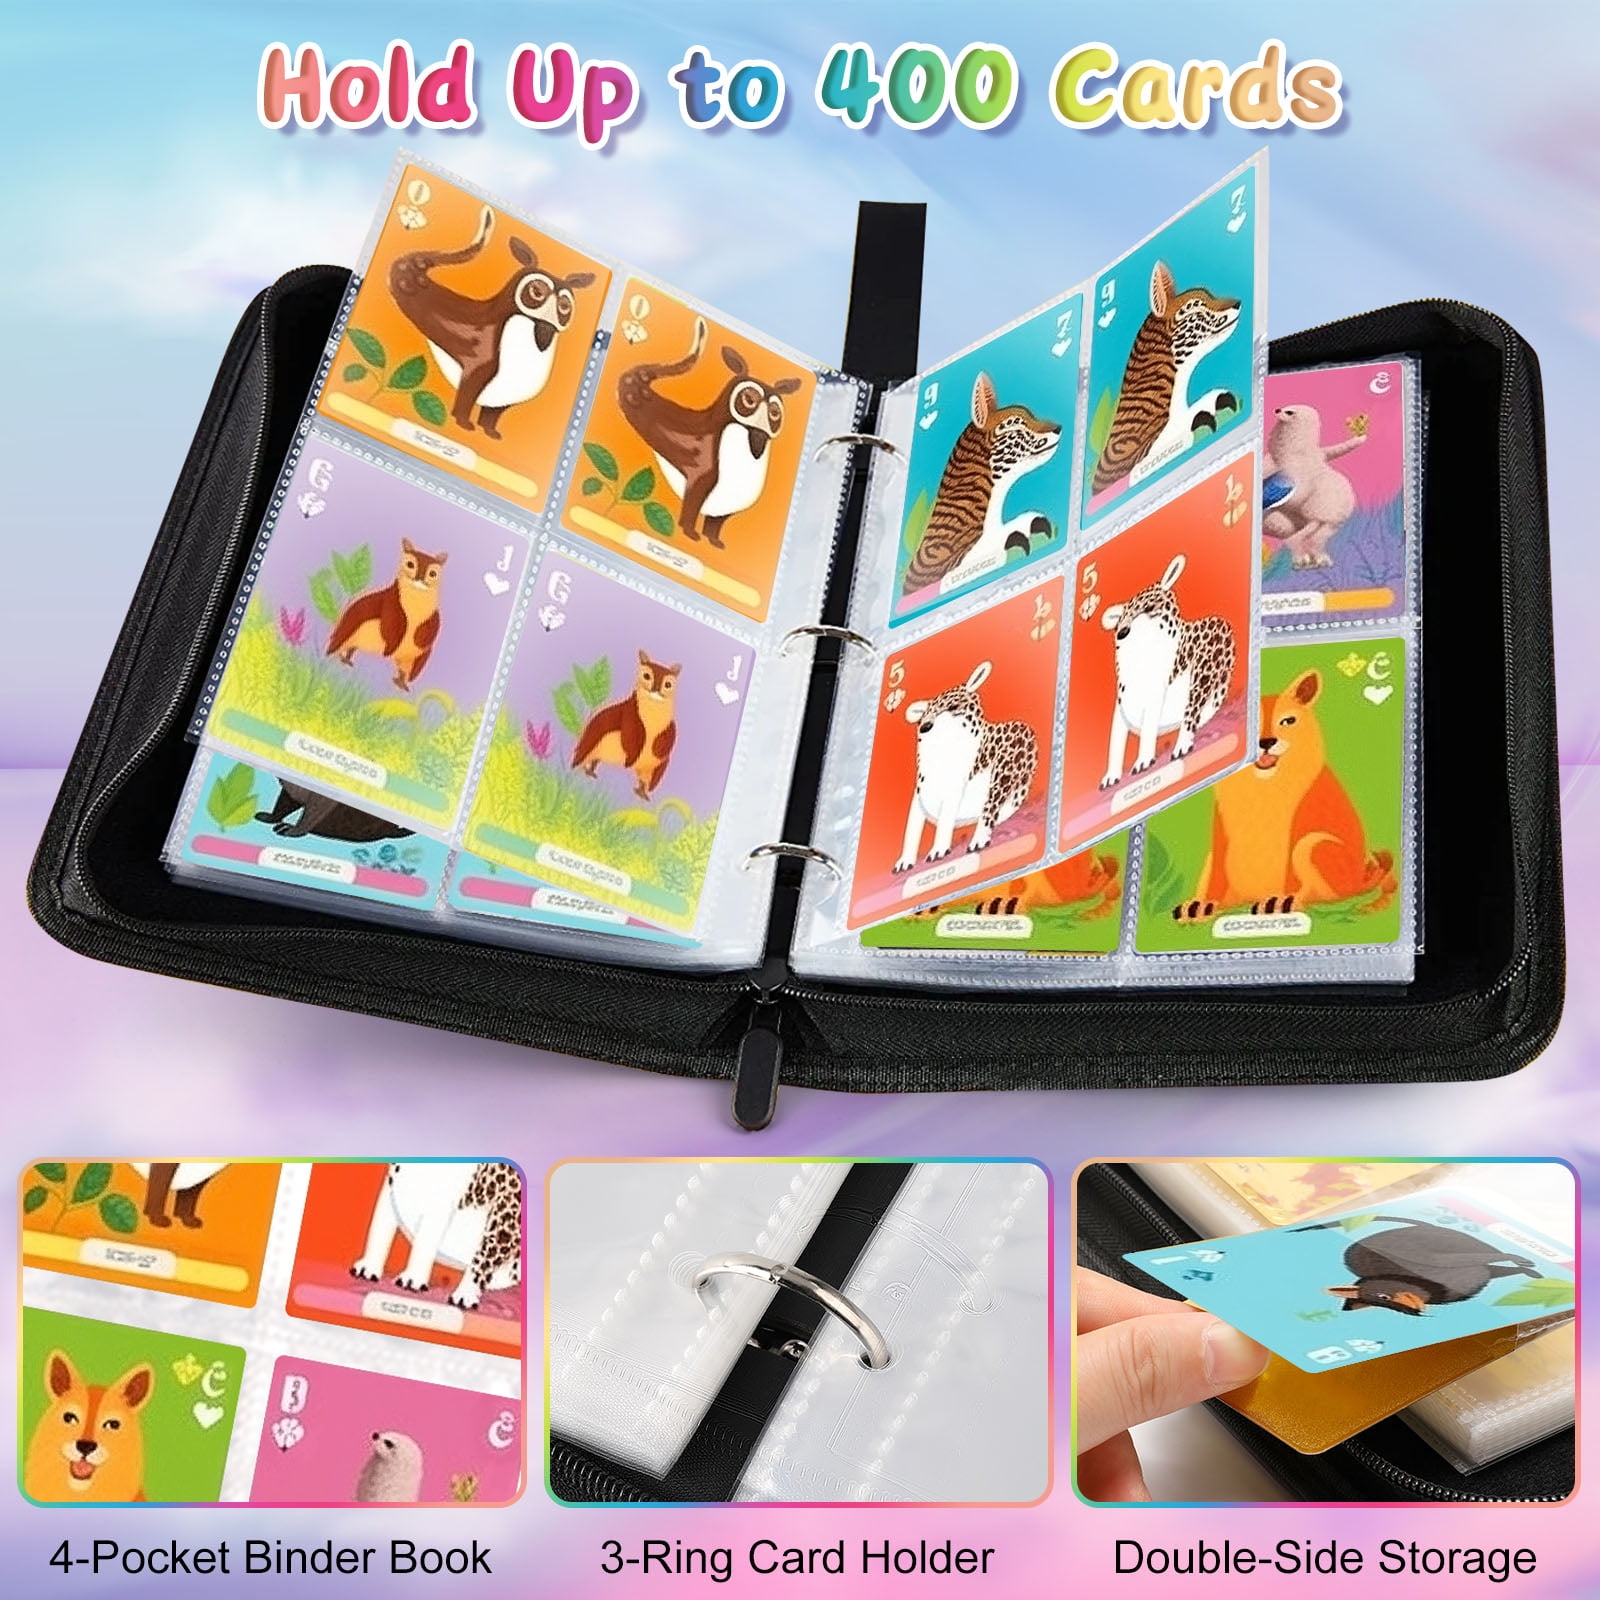 Binder for Trading Cards with Sleeves, 50Pcs 4-Pocket Pages Card Album with  Zipper Binder Case - Holds Up to 400 Cards